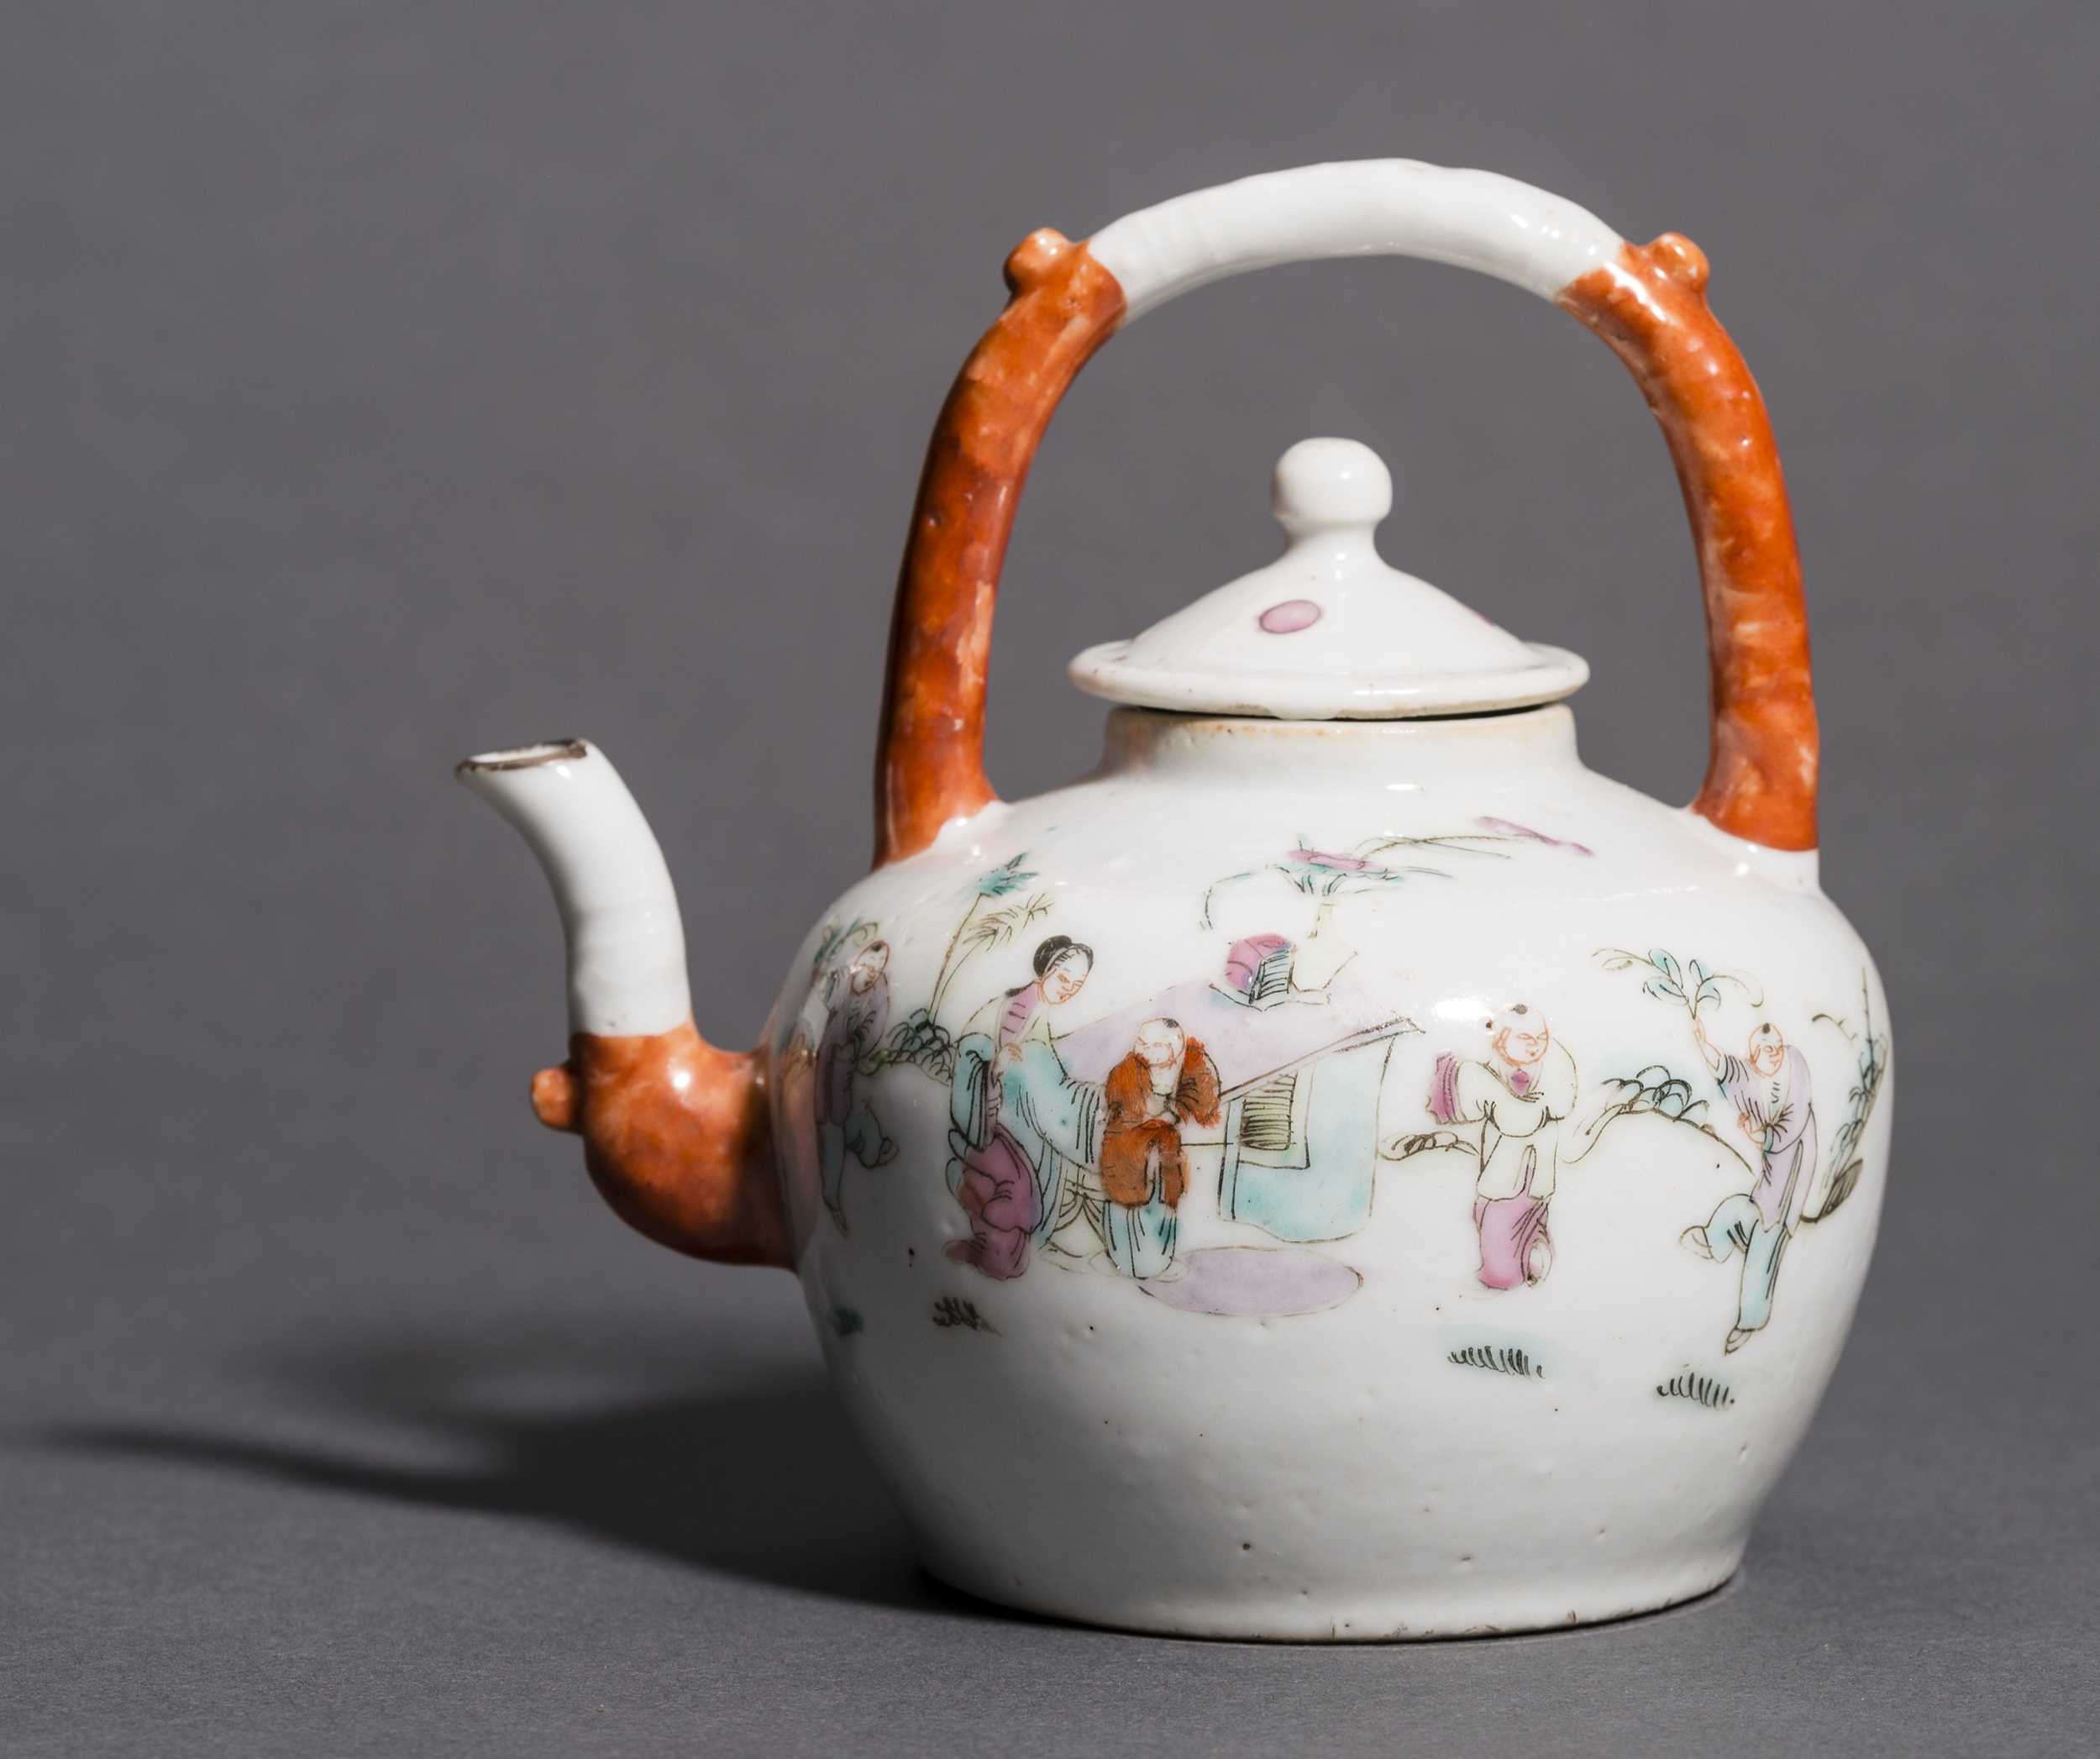 Lot 361 - A SMALL PORCELAIN POT WITH LADIES, SERVANTS AND BOYS